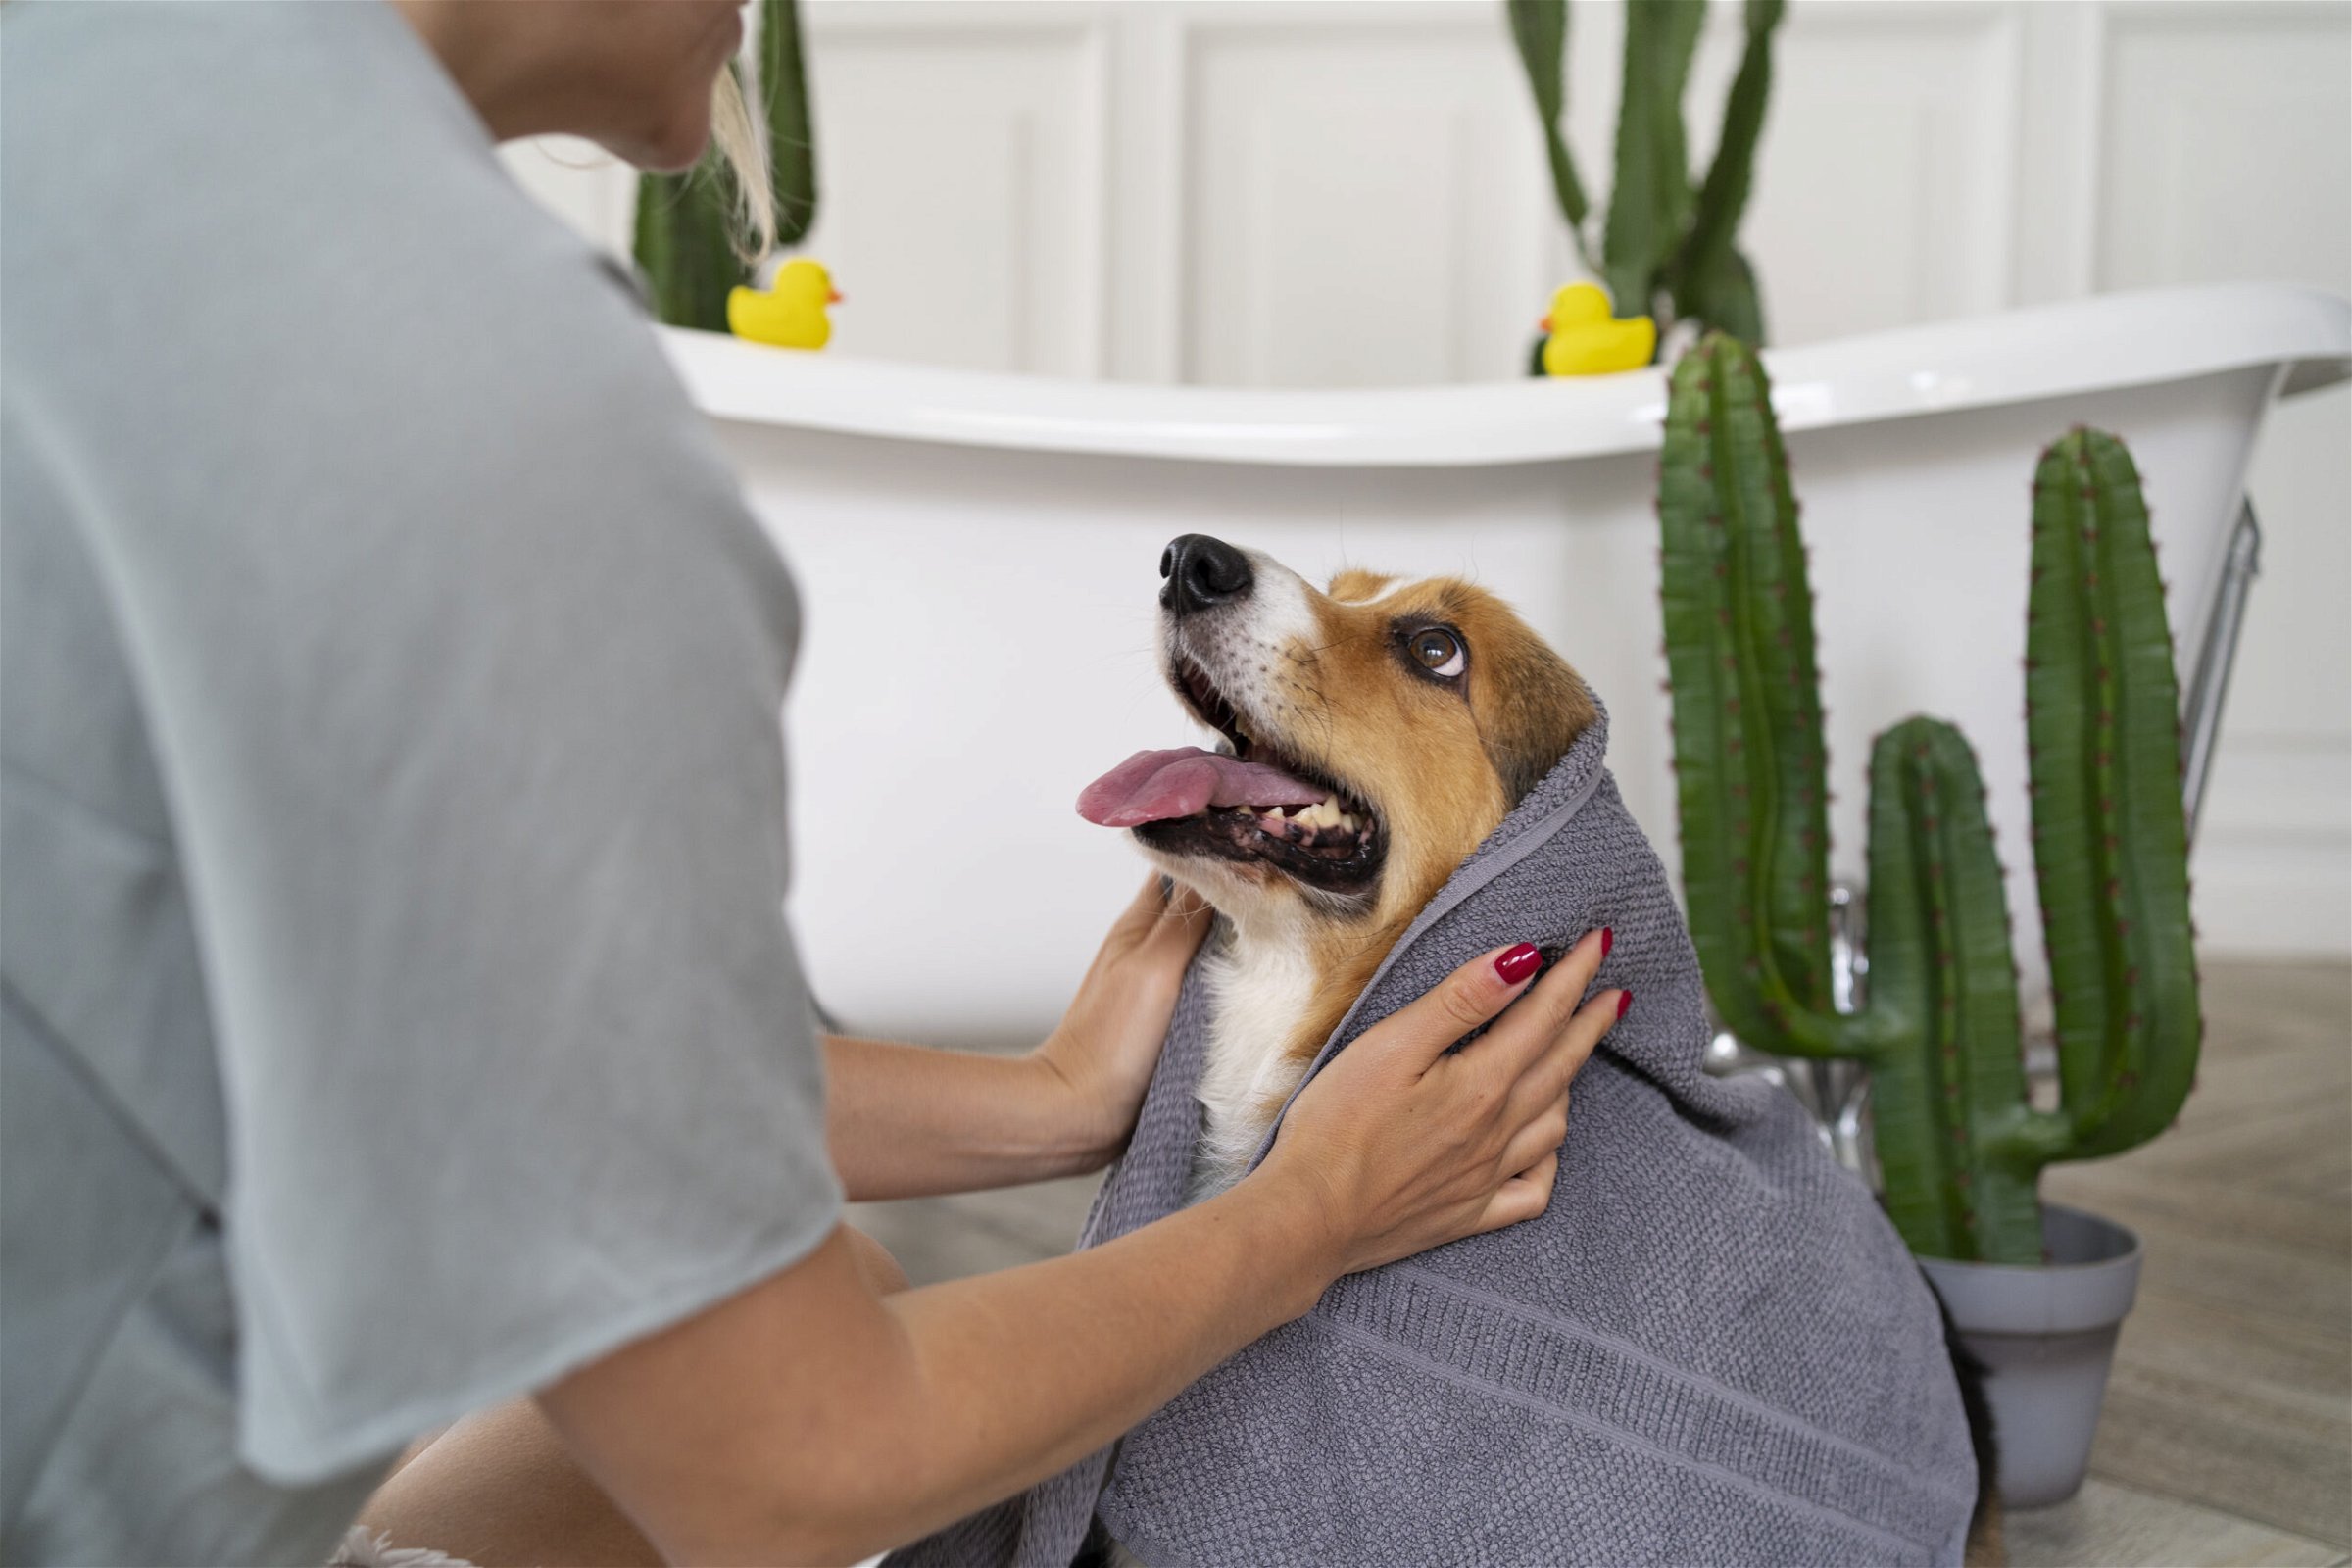 A dog wrapped in a towel receiving attention from a pet groomer after a bath.